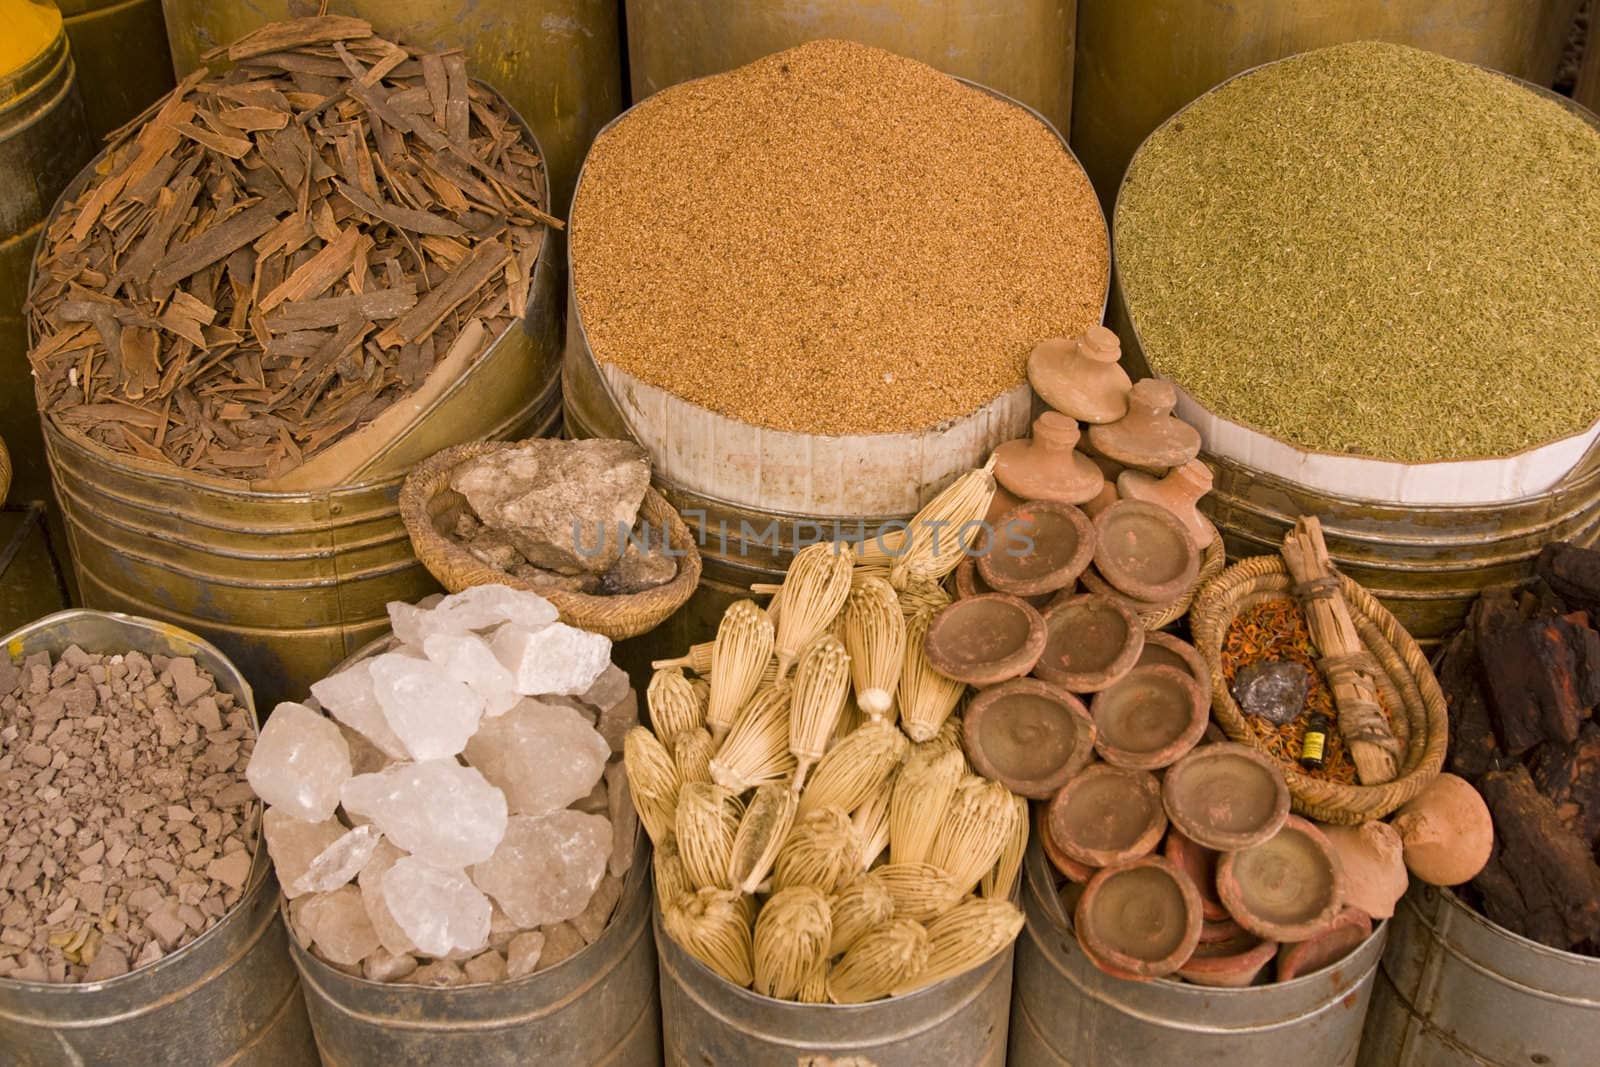 Containers of herbs and spices for sale in a shop in the historic heart of Marrakesh, Morocco